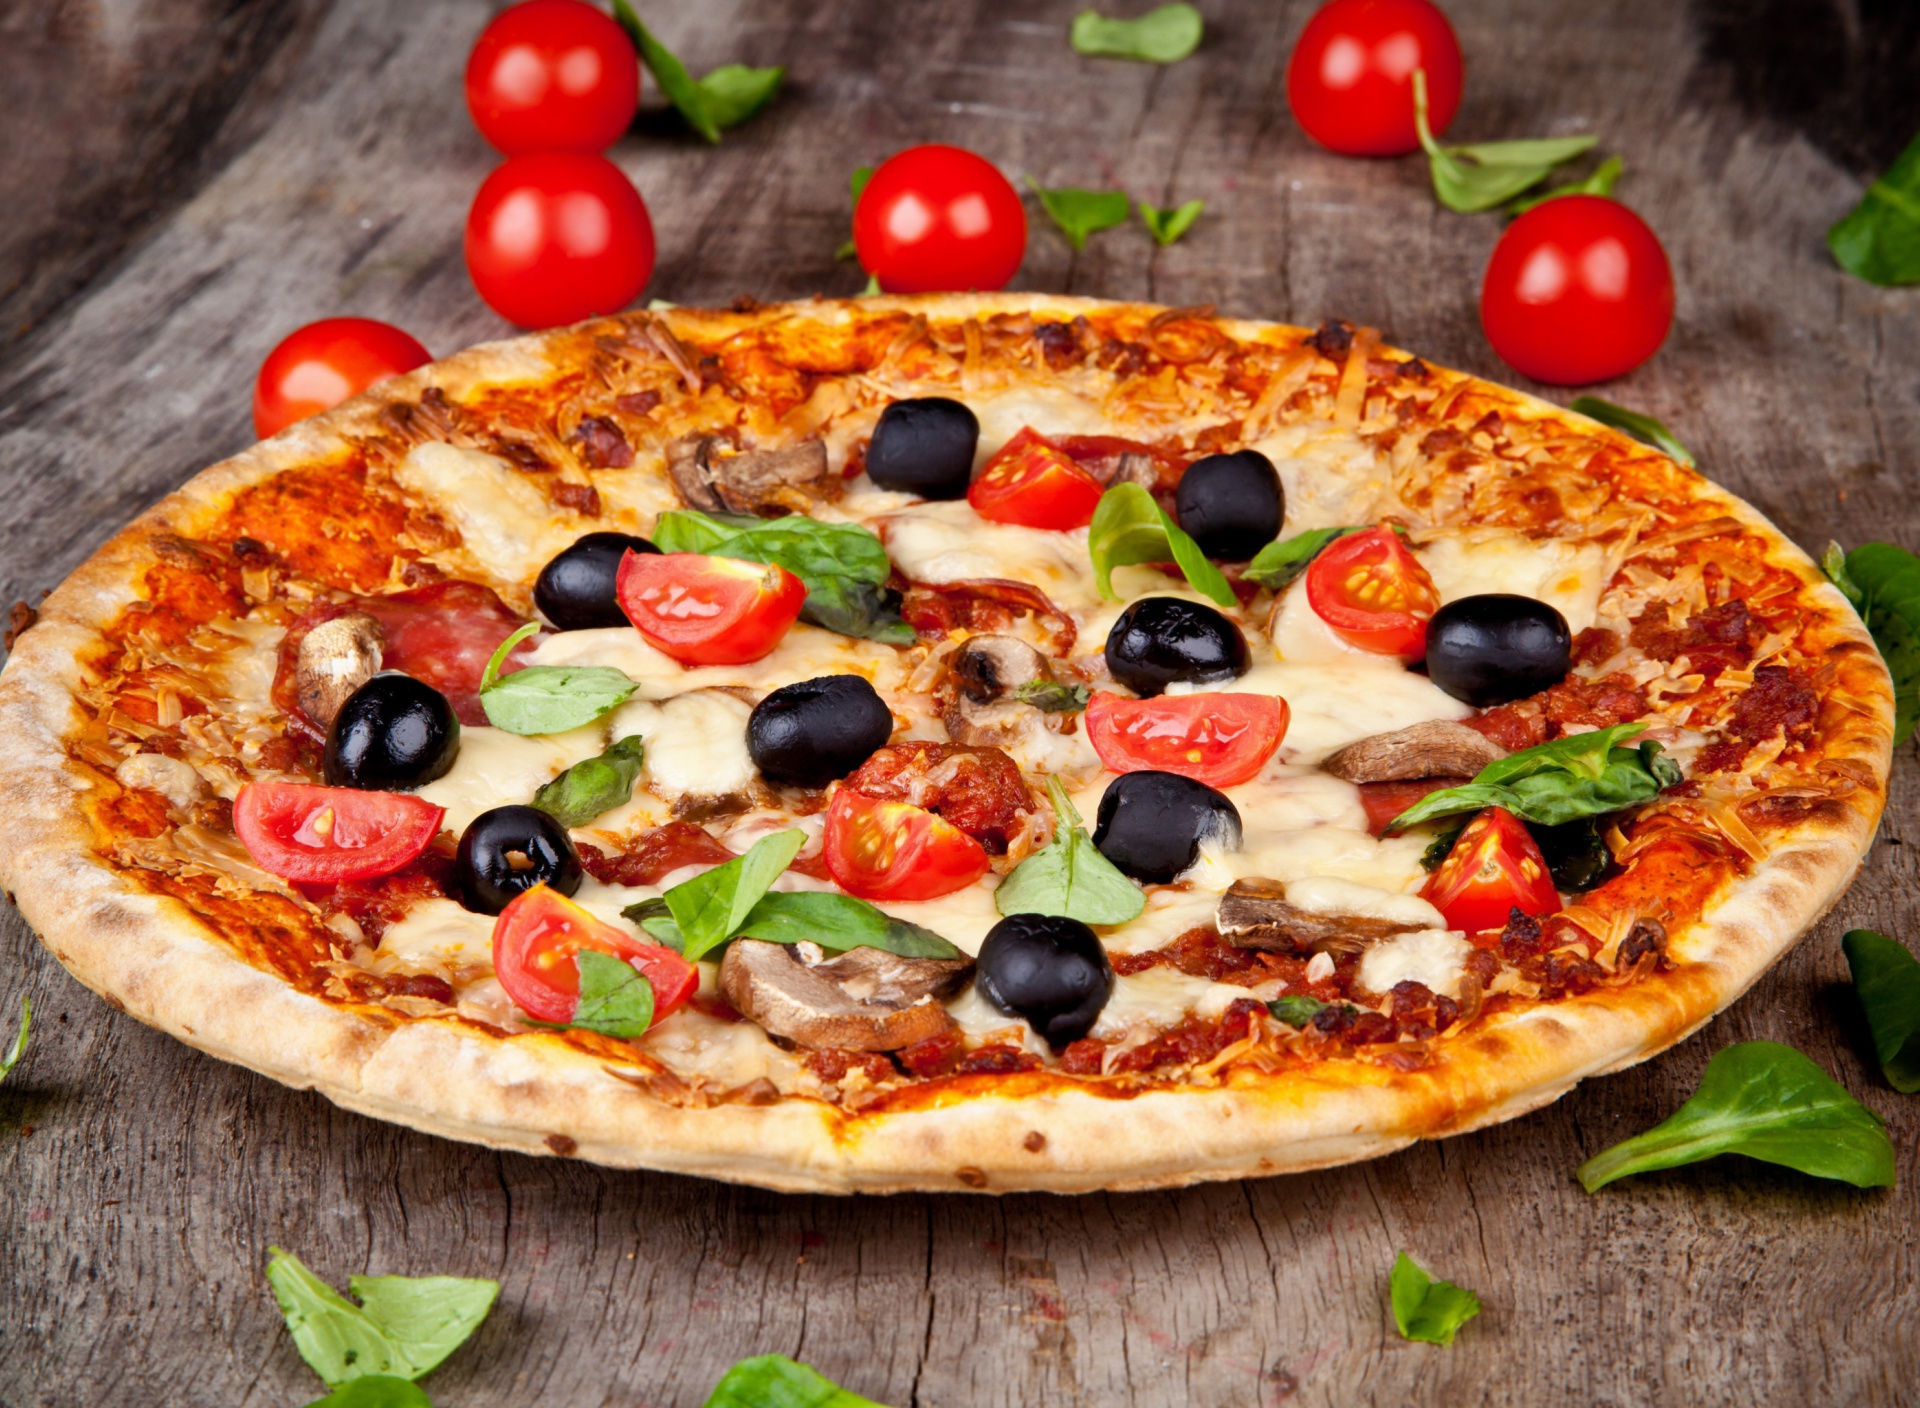 Pizza with tomatoes and olives wallpaper 1920x1408